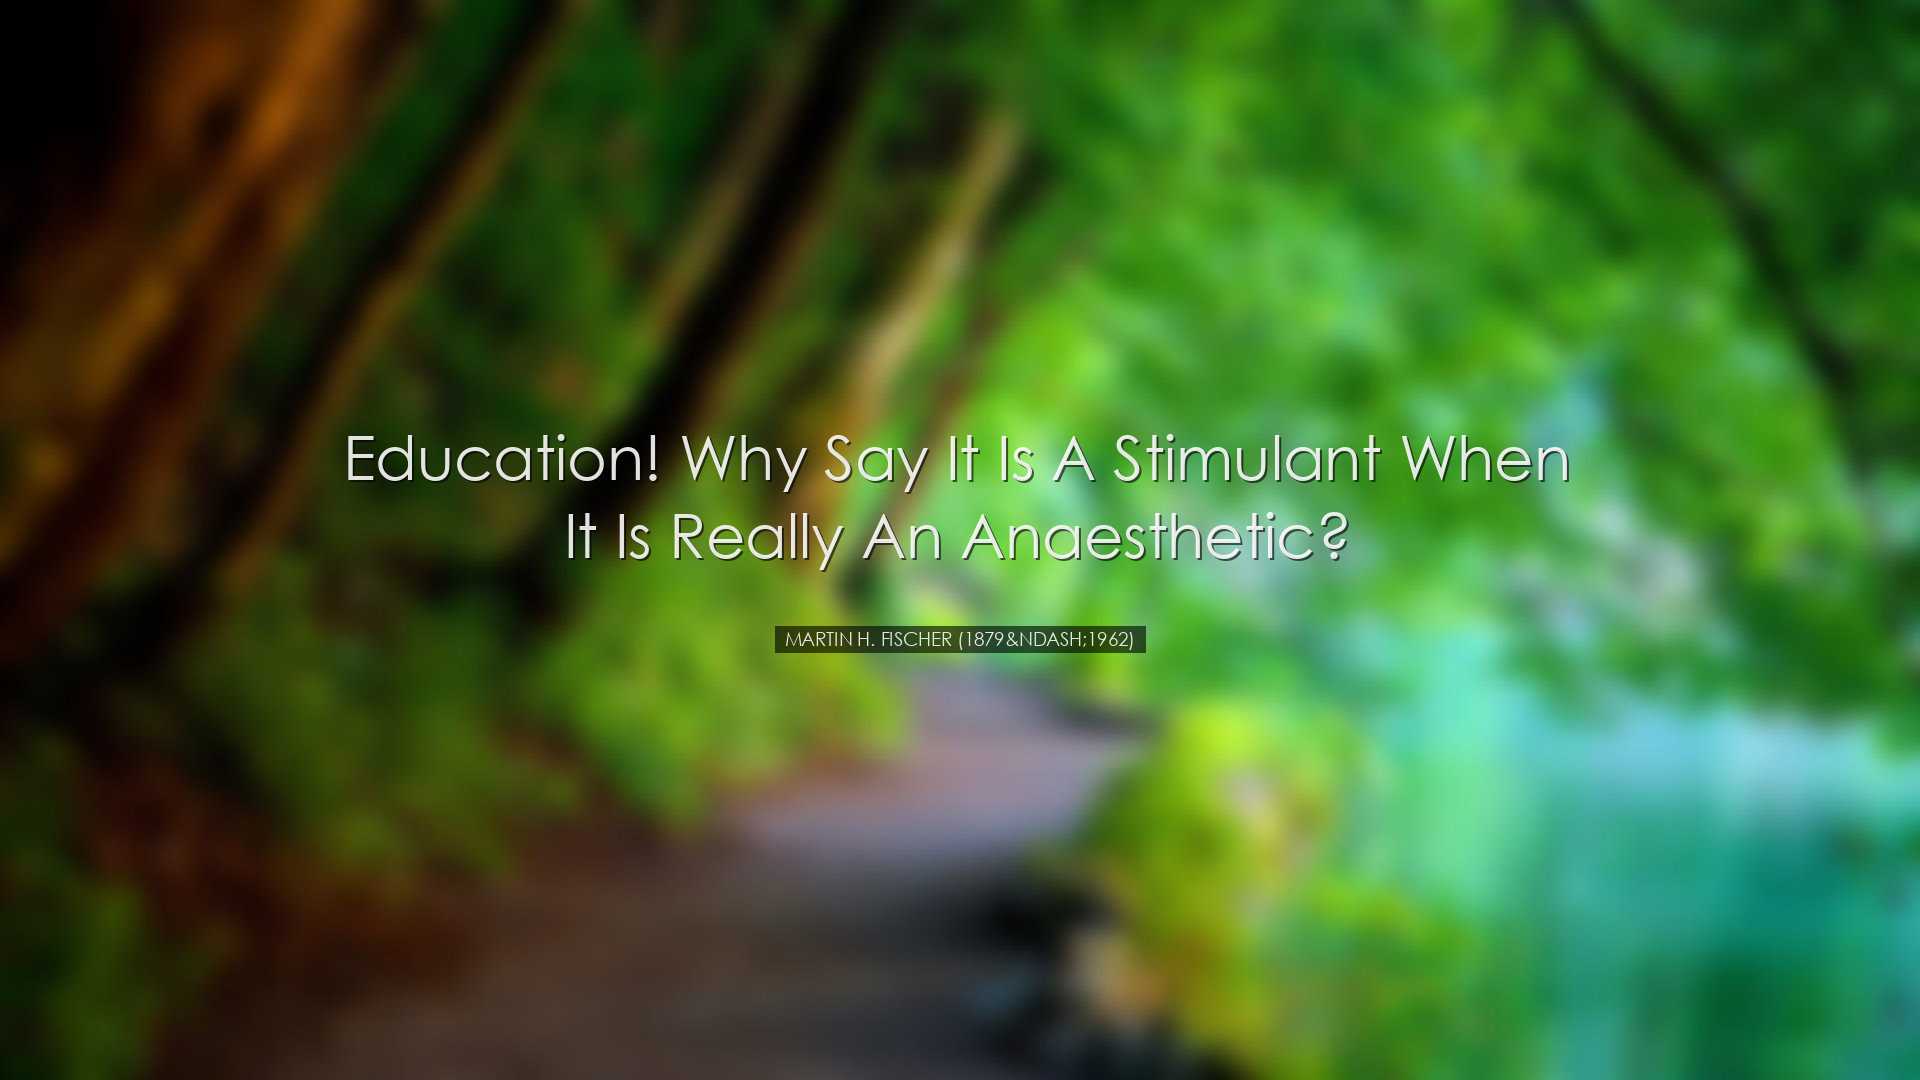 Education! Why say it is a stimulant when it is really an anaesthe